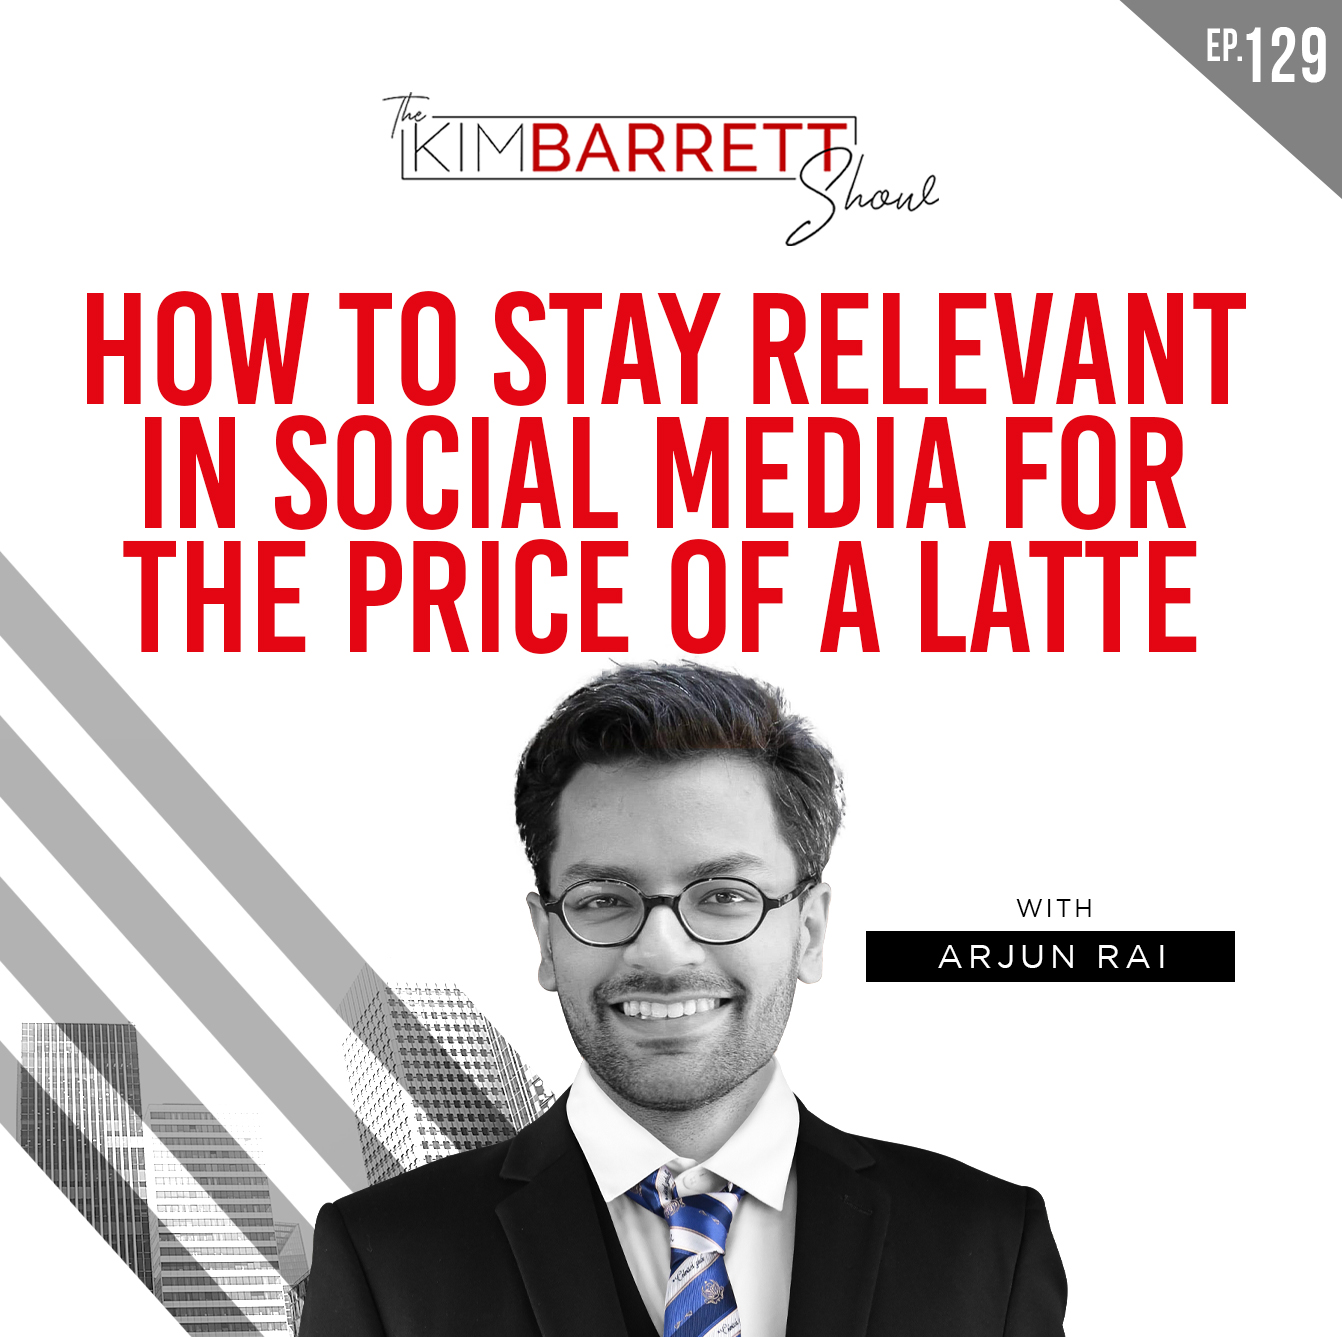 [Throwback Episode] How to Stay Relevant in Social Media for the Price of a Latte with Arjun Rai